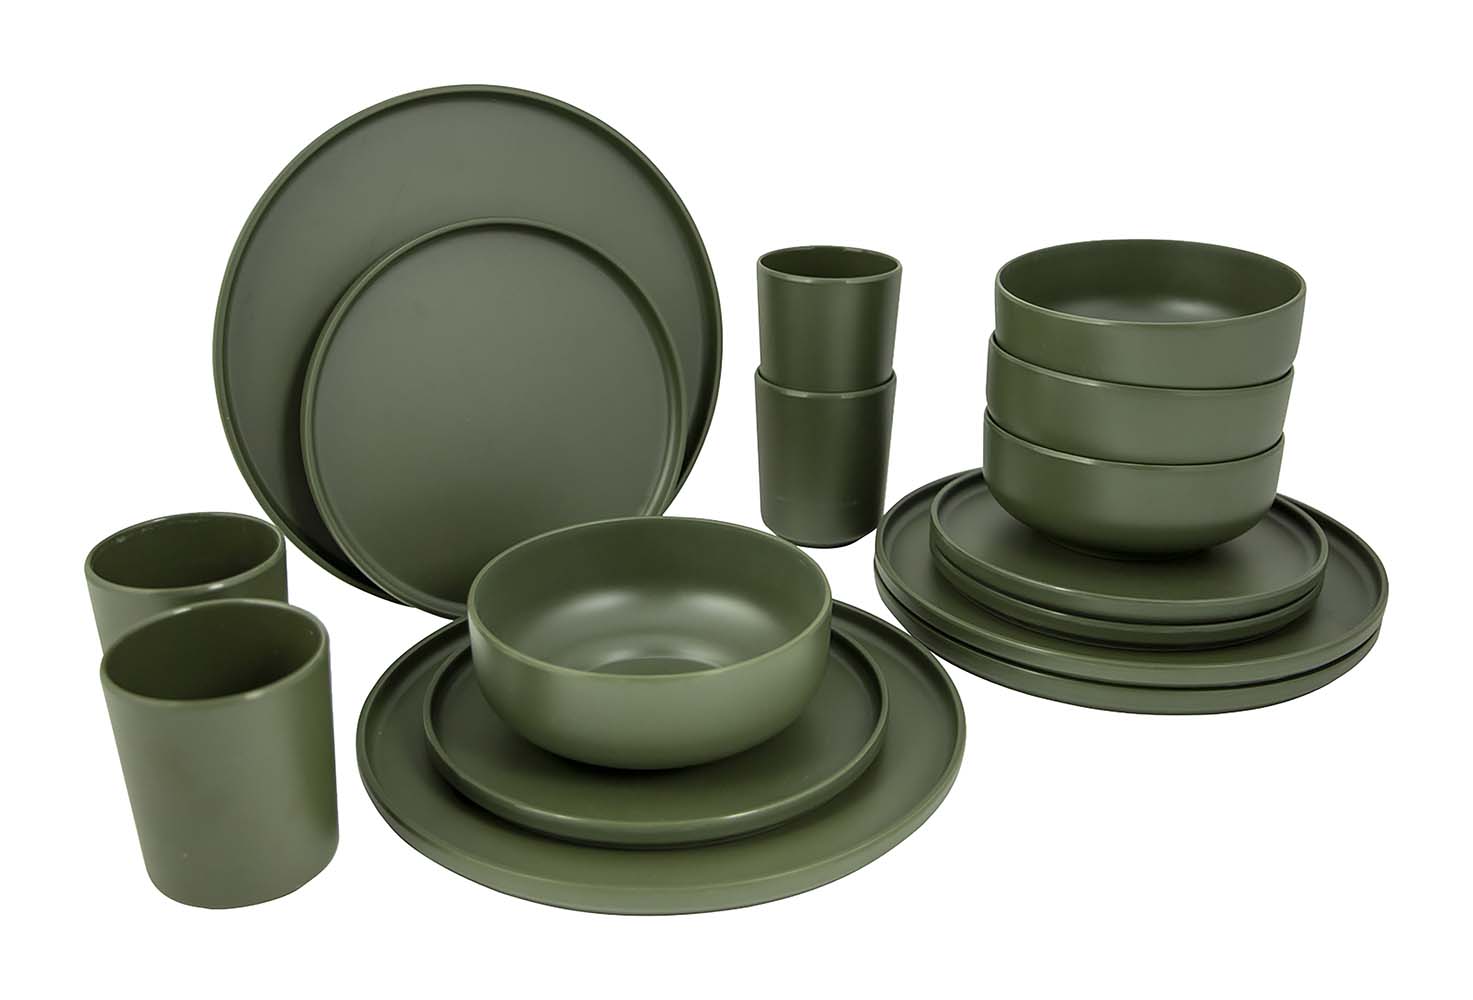 Bo-Camp - Industrial collection - Tableware - Patom - Melamine - 16 Pieces - Green